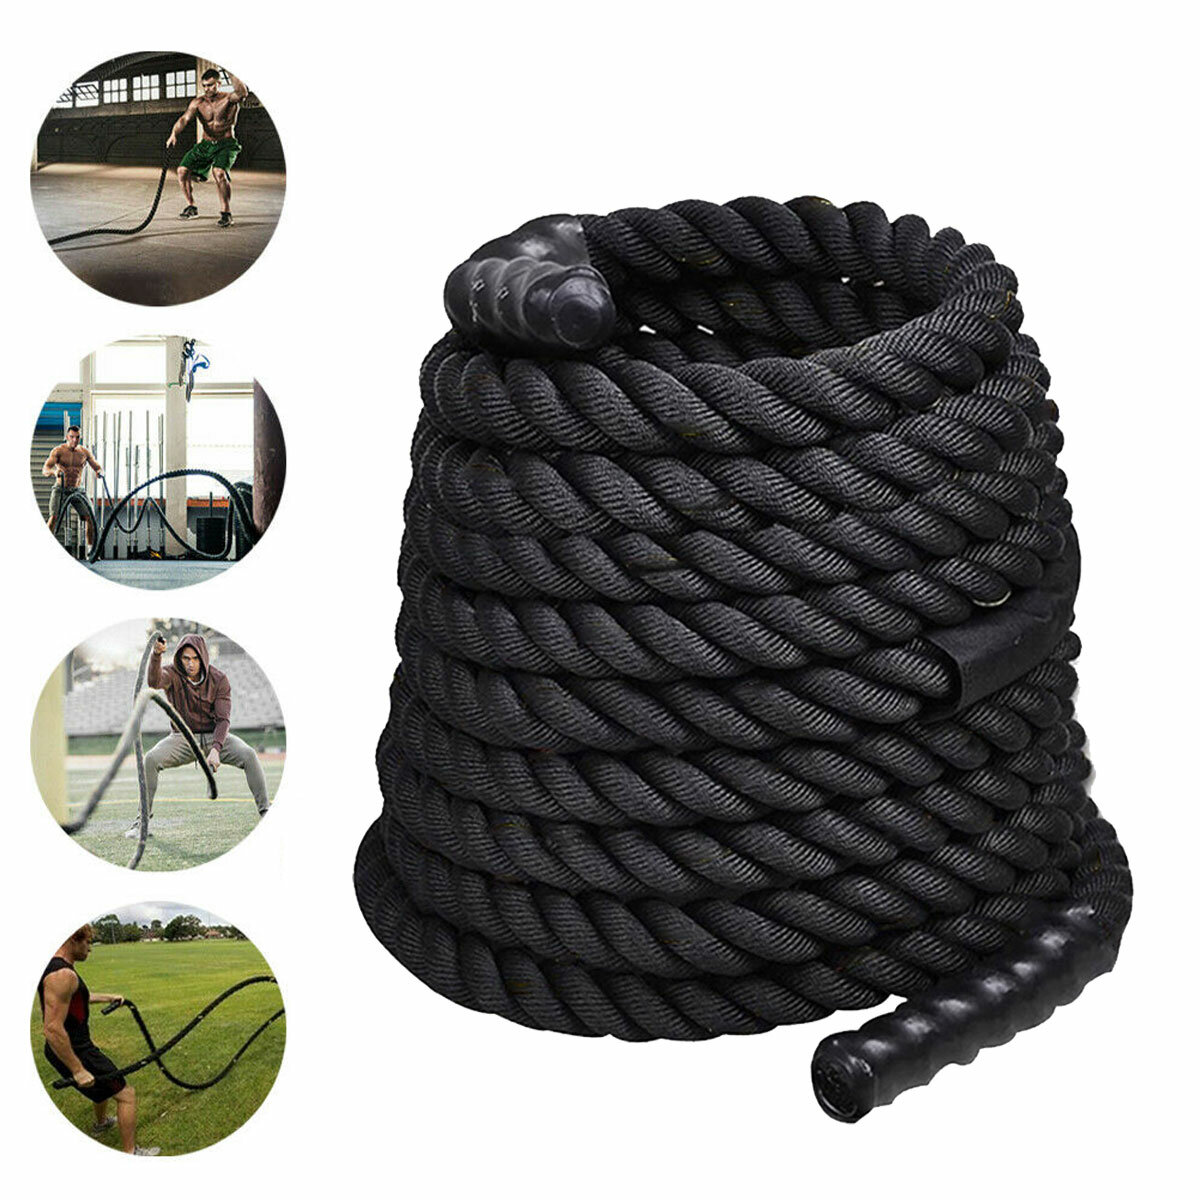 9M Length Fitness Battle Rope Heavy Jump Rope Weighted Battle Skipping Ropes Retainer Gym Exercise T